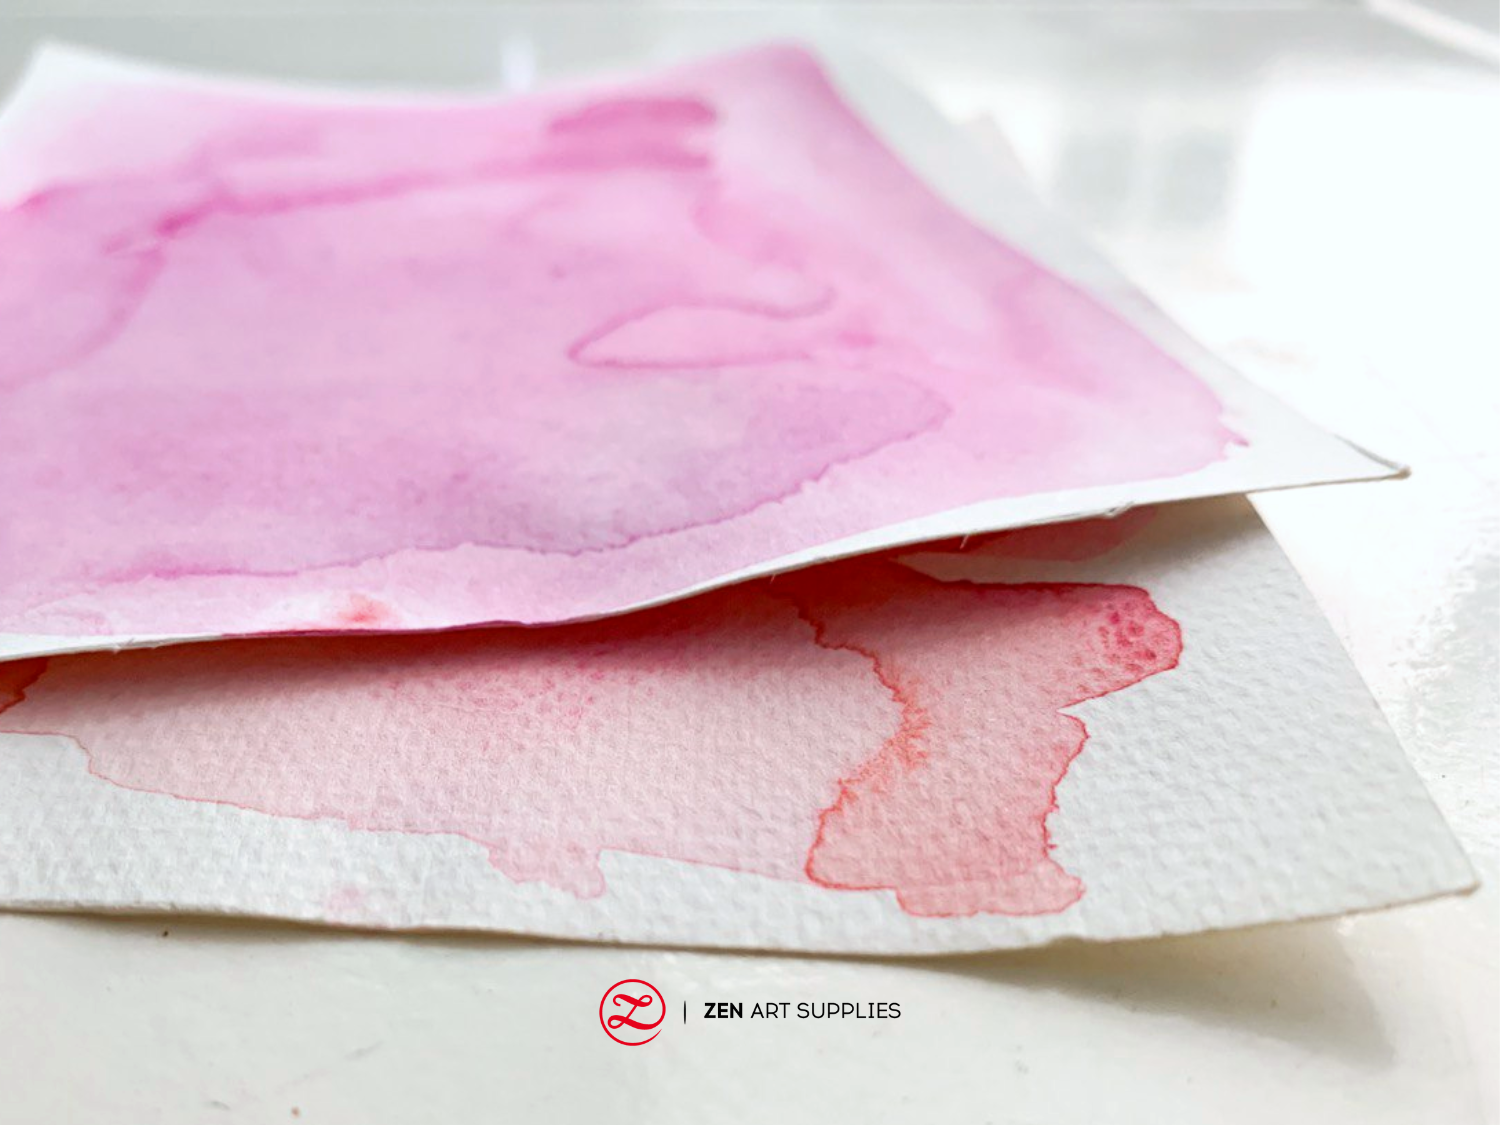 Watercolor paper that has buckled